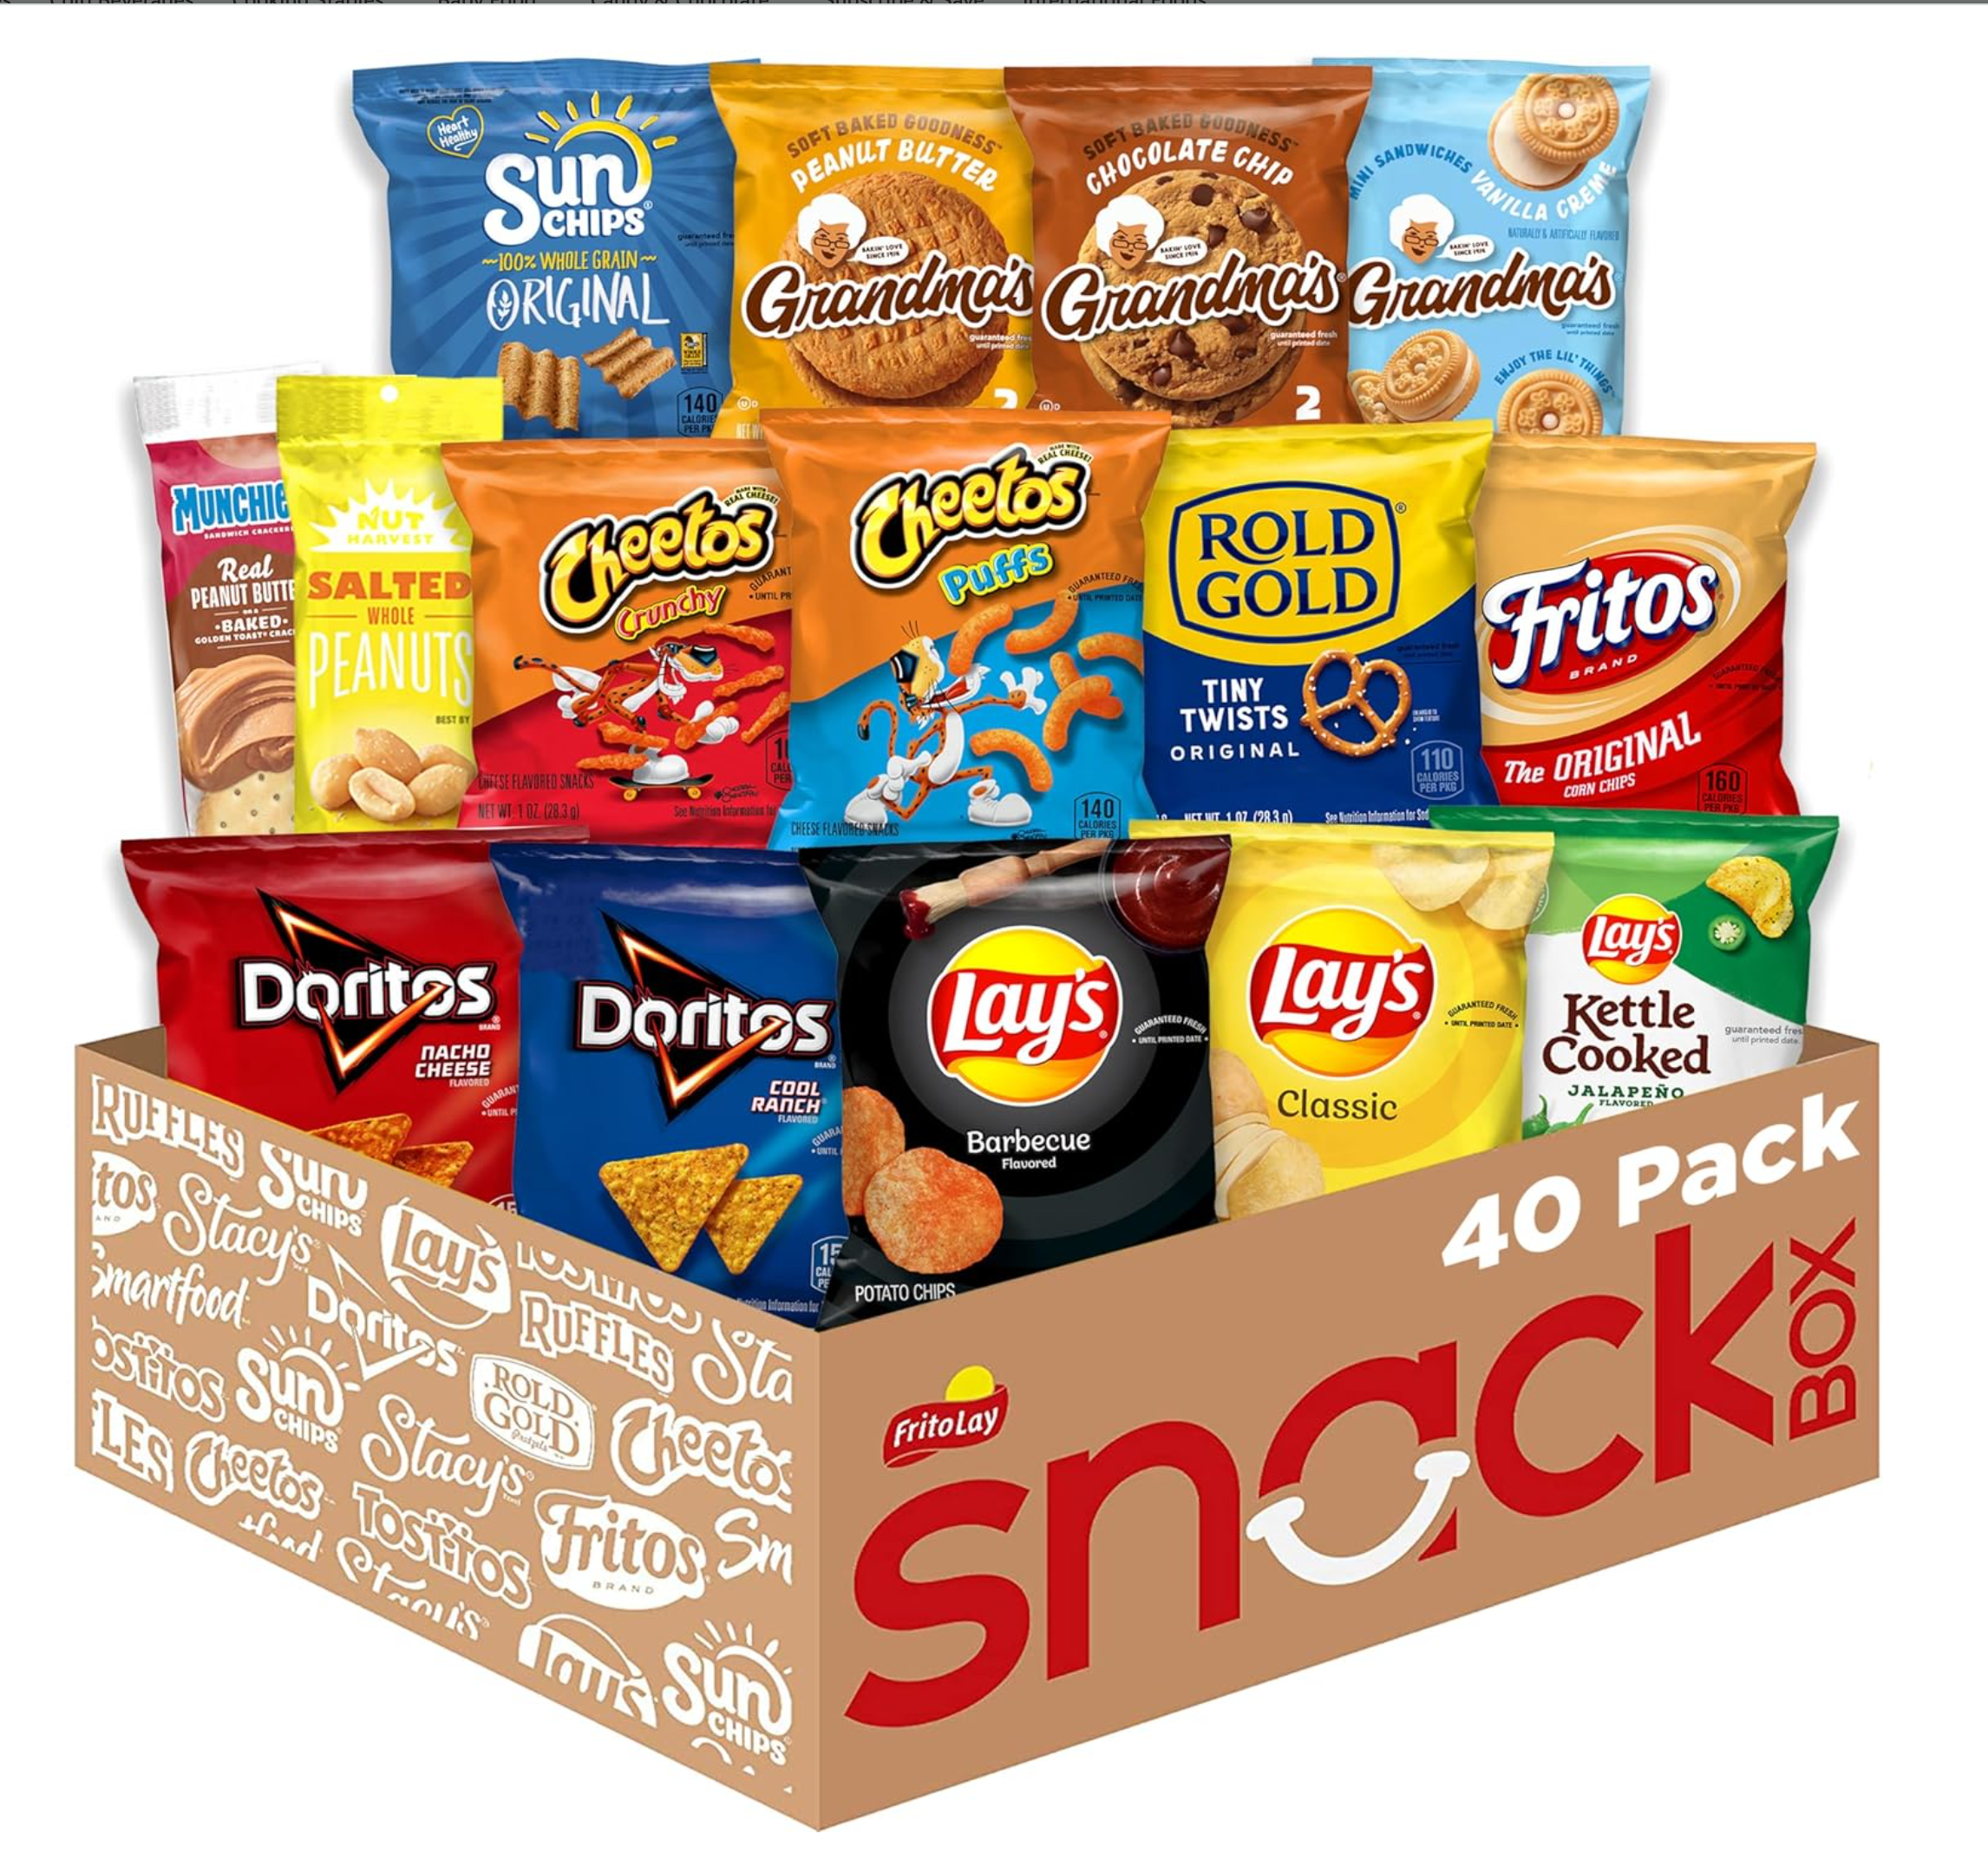 assorted-chips-snack-pack-frito-lay